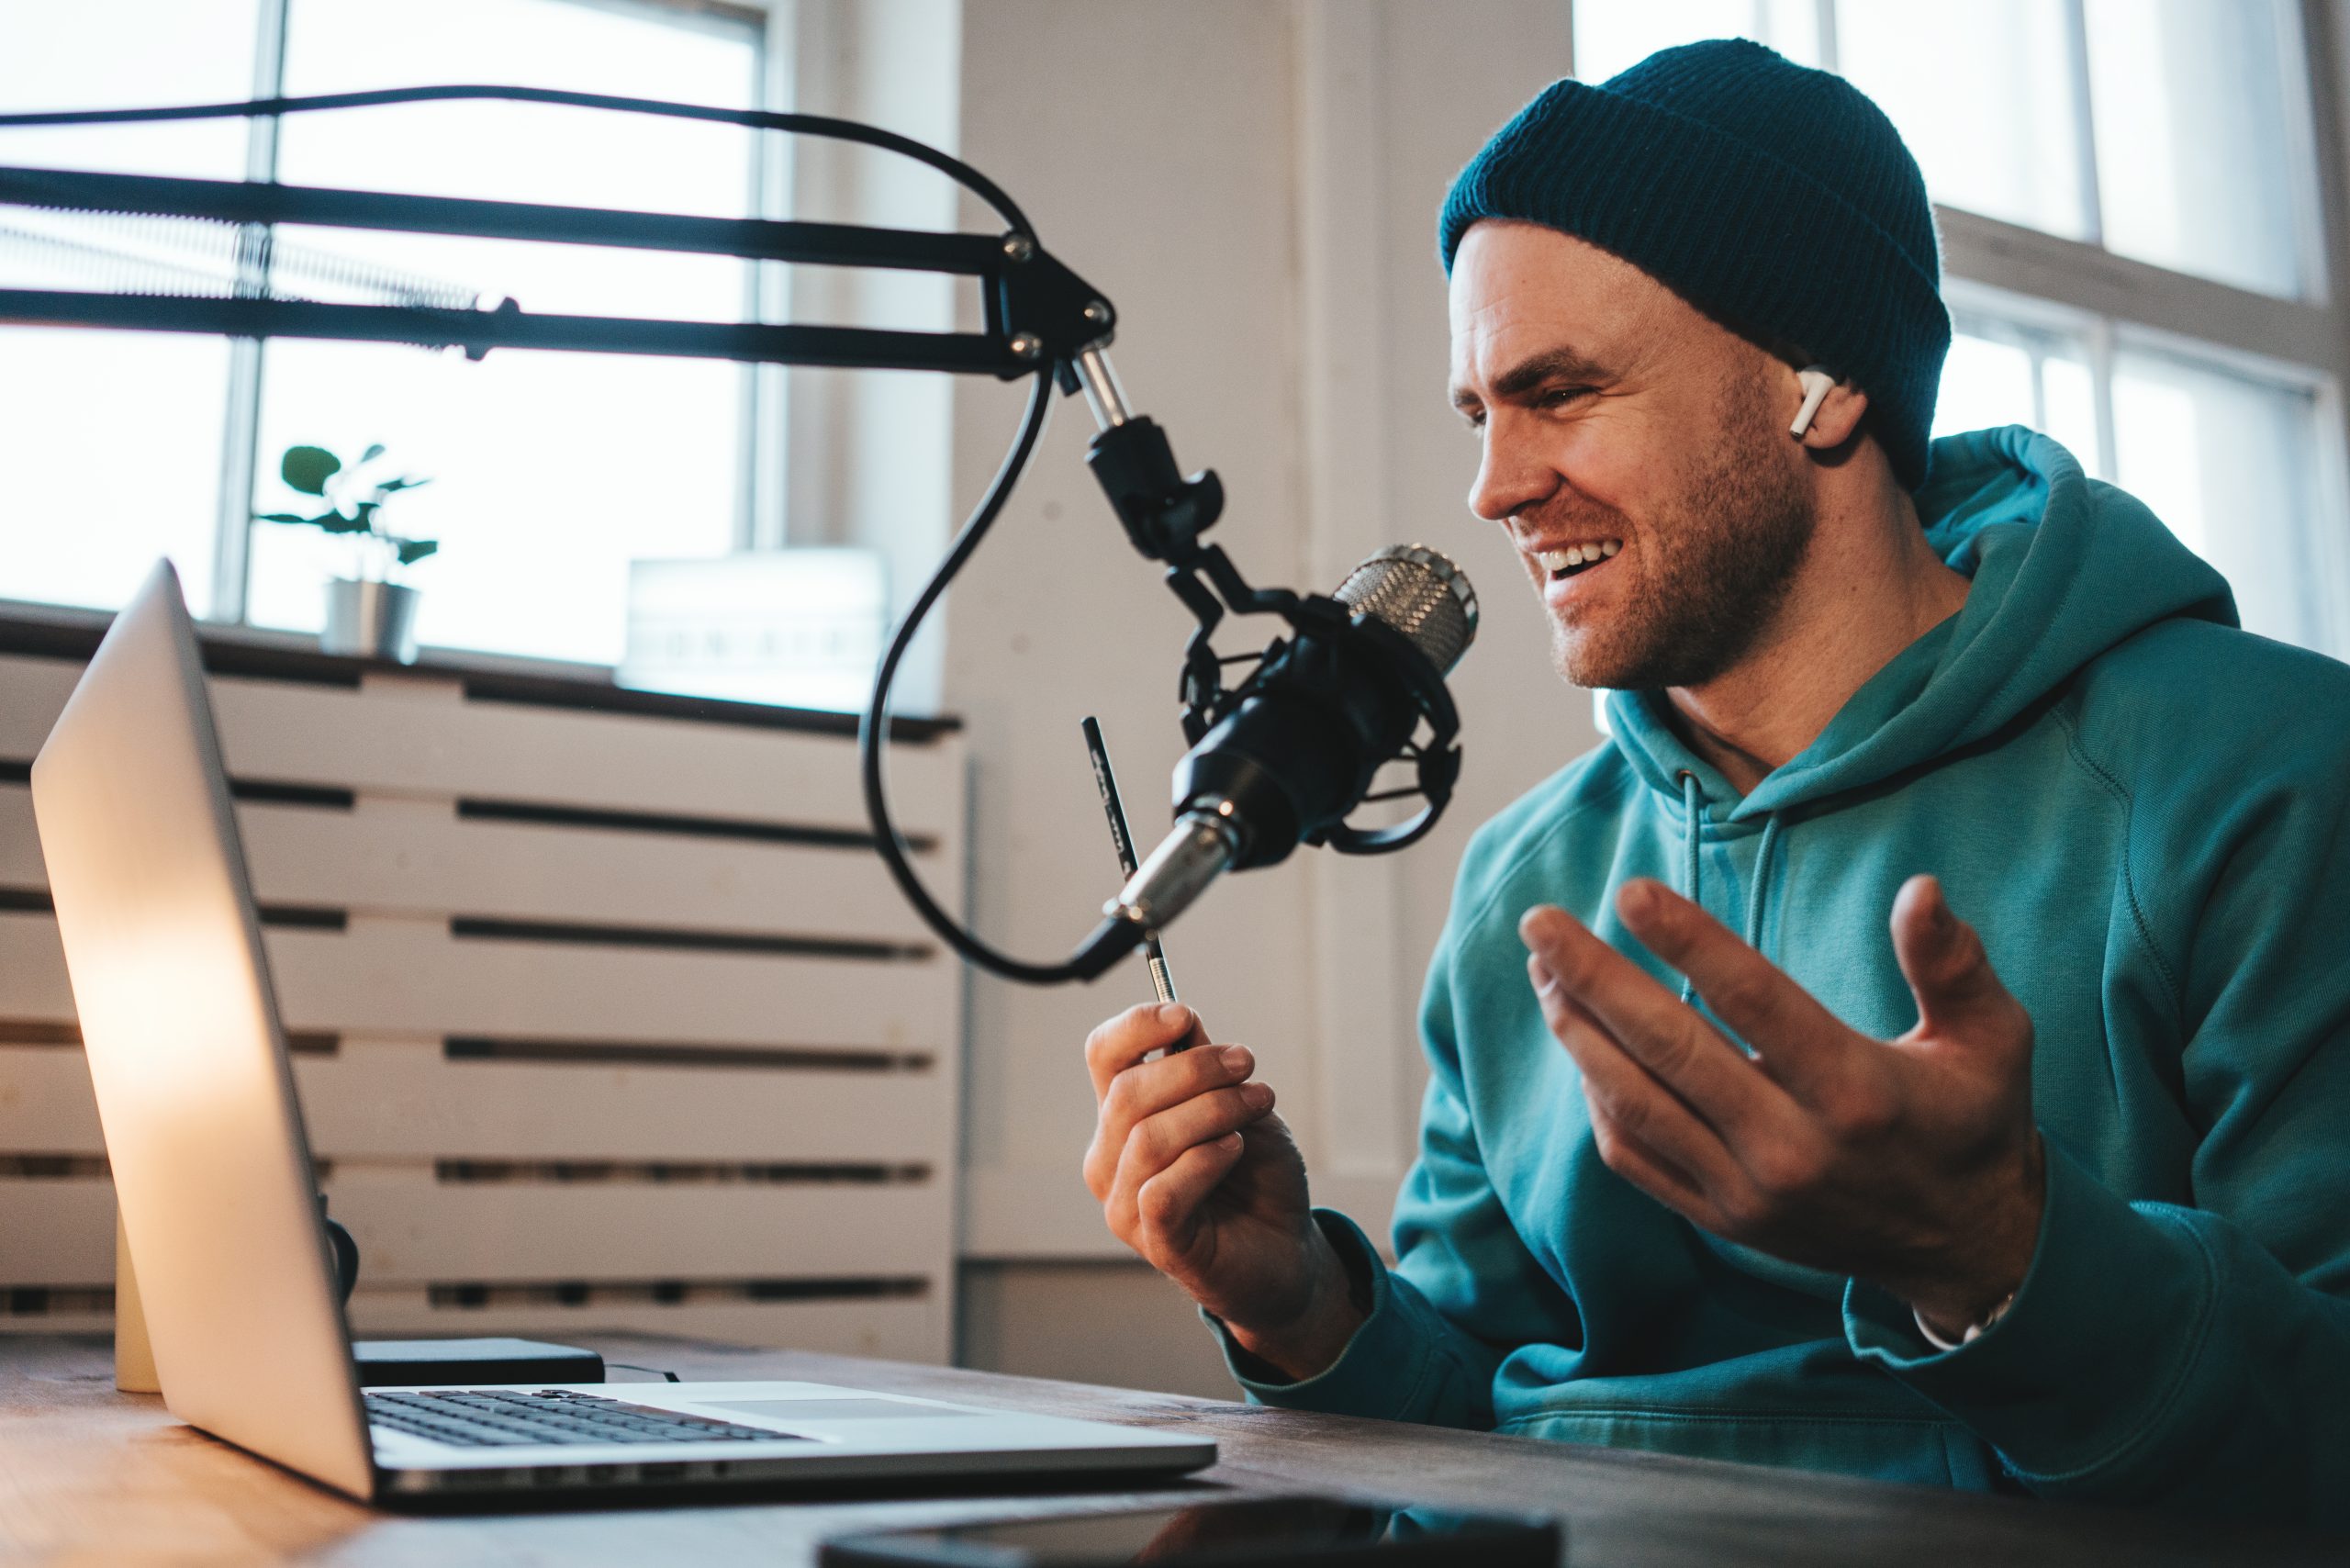 Cheerful host with stubble streaming his audio podcast using microphone and laptop at his small broadcast studio